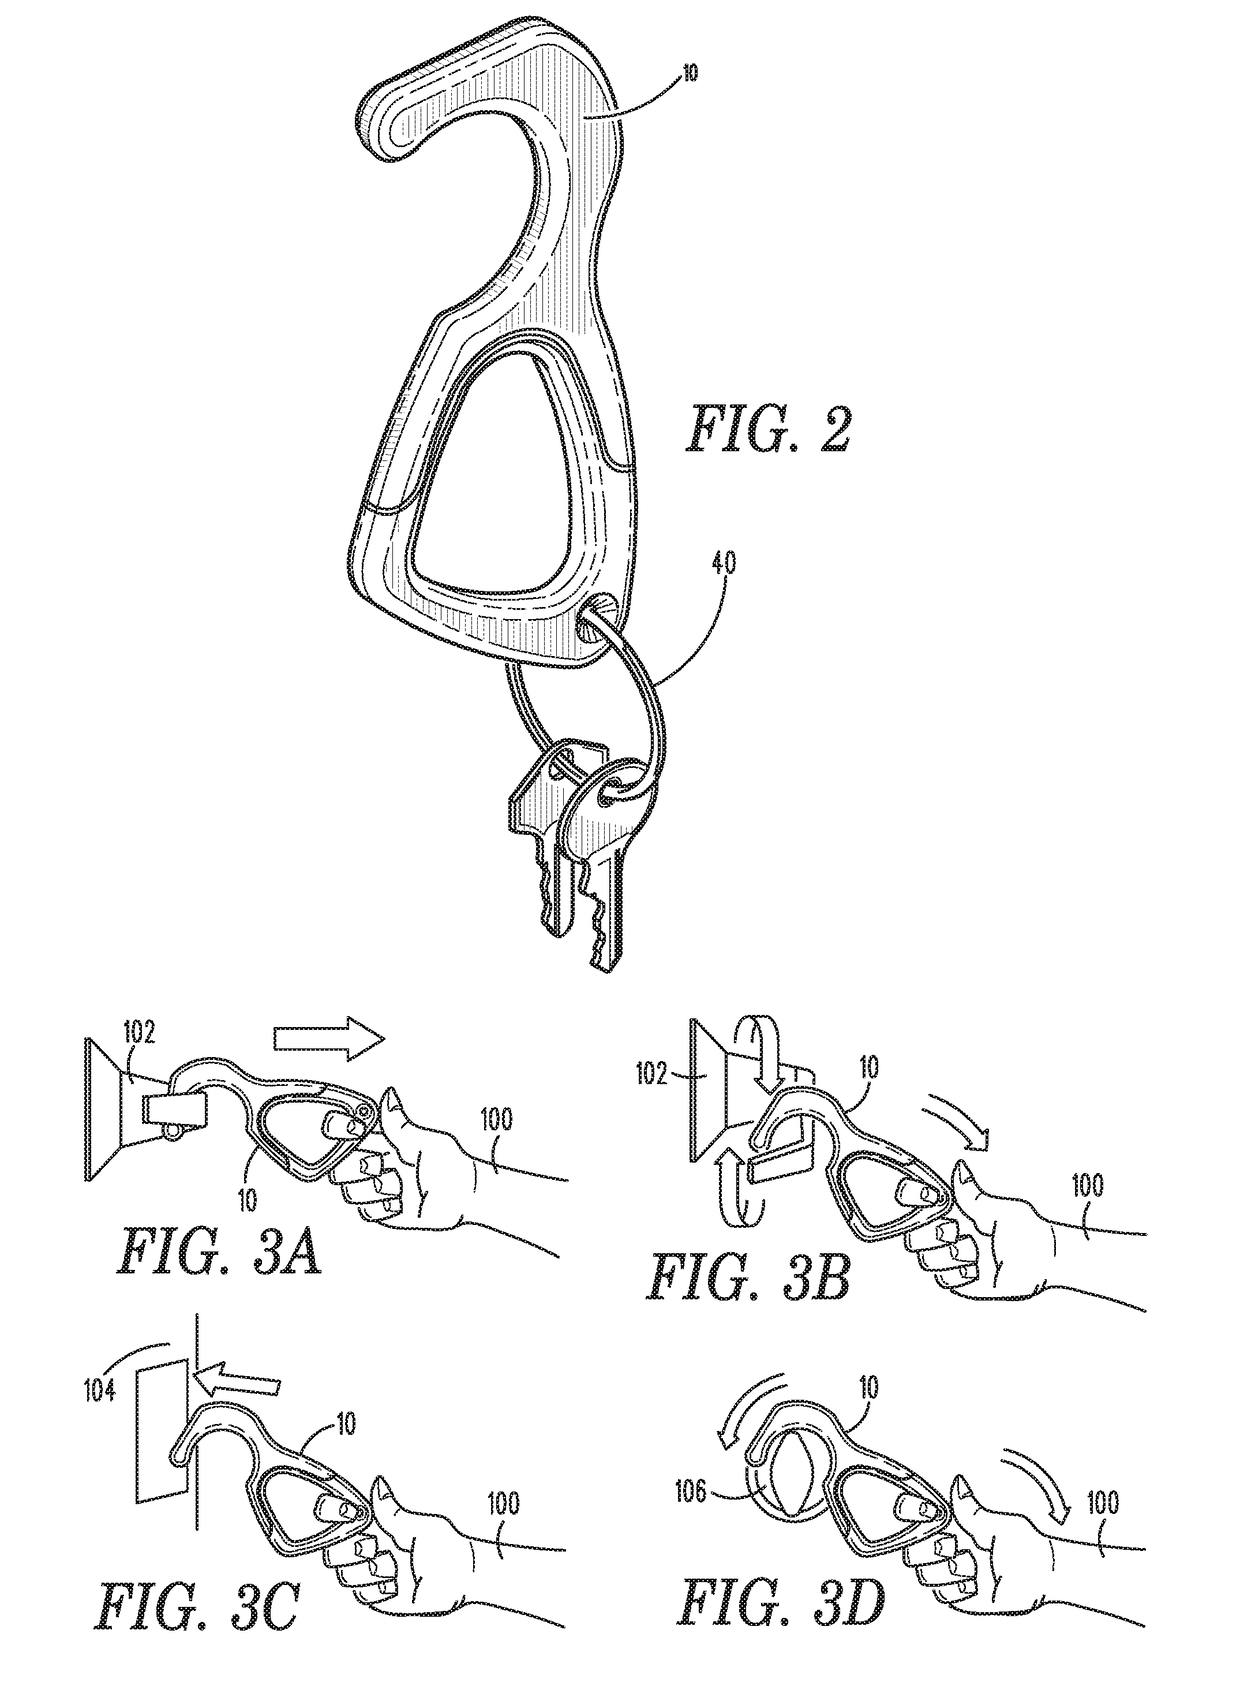 Hook Apparatus and Methods of Using the Same